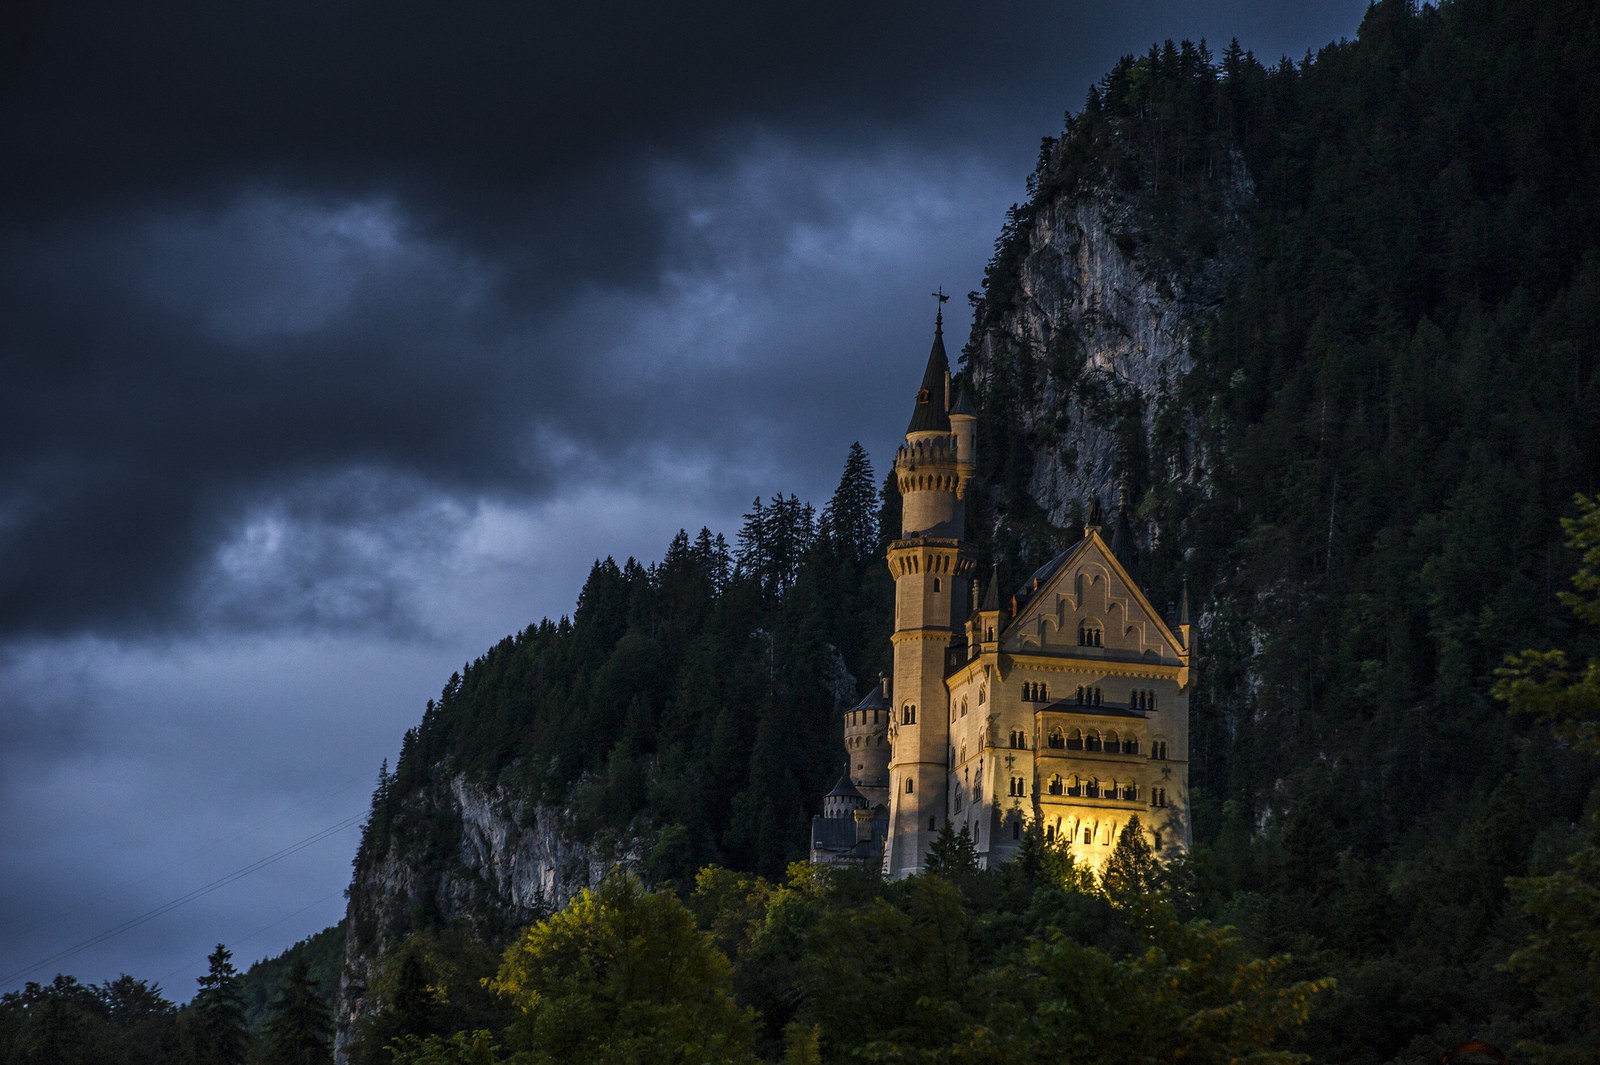 General 1600x1065 photography nature clouds trees forest rocks mountains castle architecture lights storm